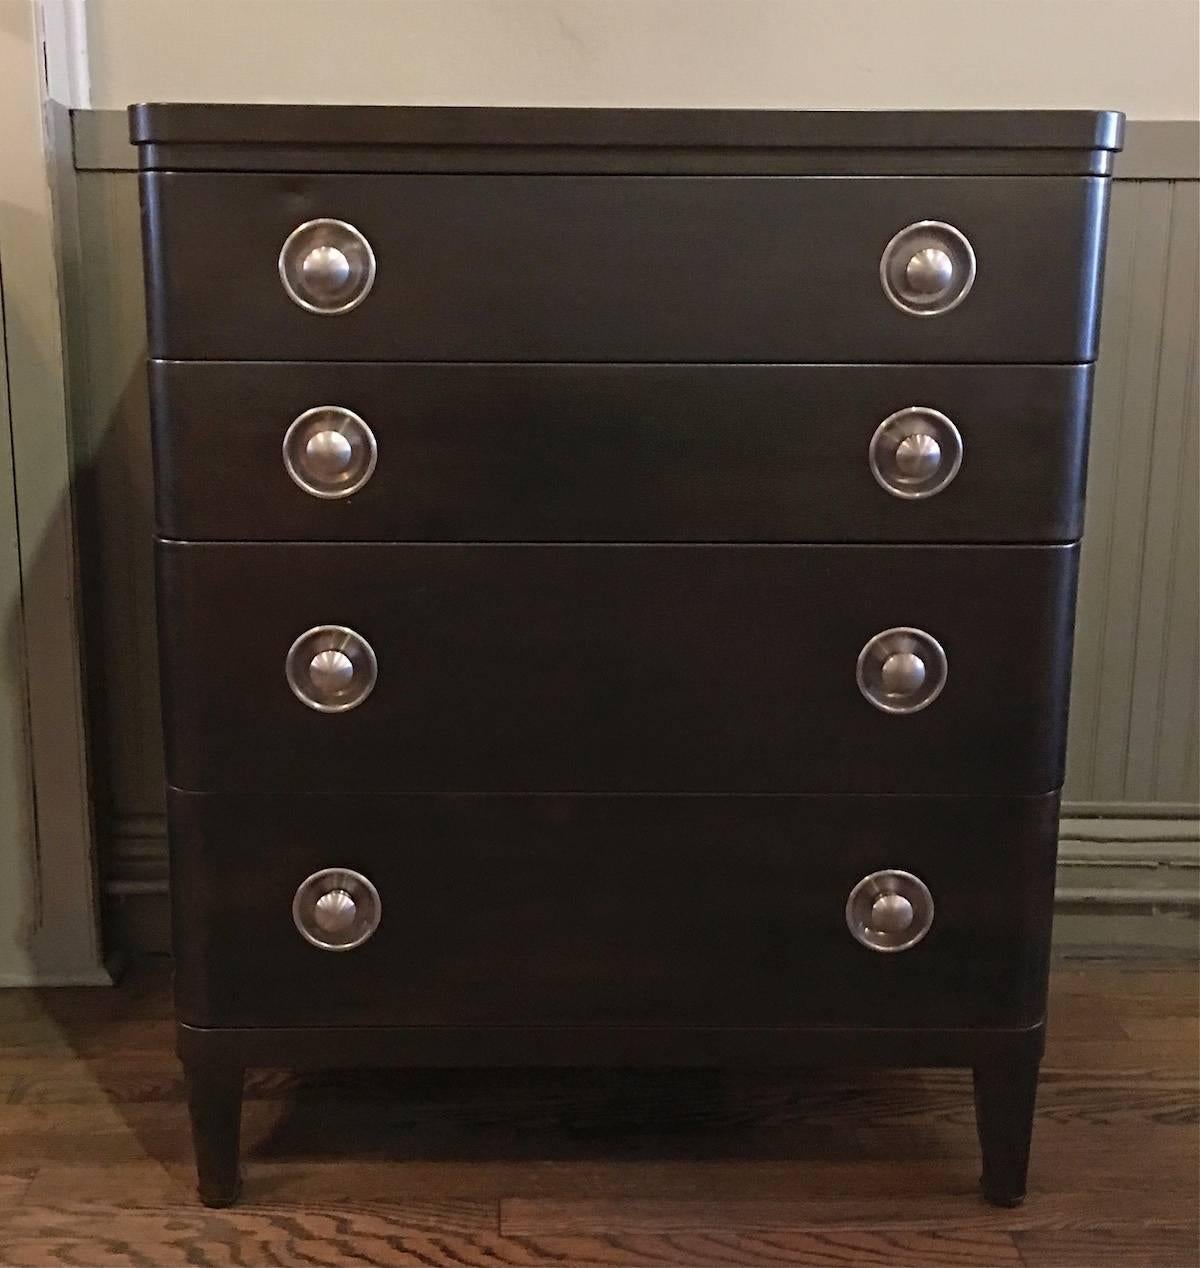 Art Deco, machine age, 1940s, steel, highboy dresser by Norman Bel Geddes for Simmons furniture company in a gunmetal finish with contrasting, recessed brushed steel pulls.